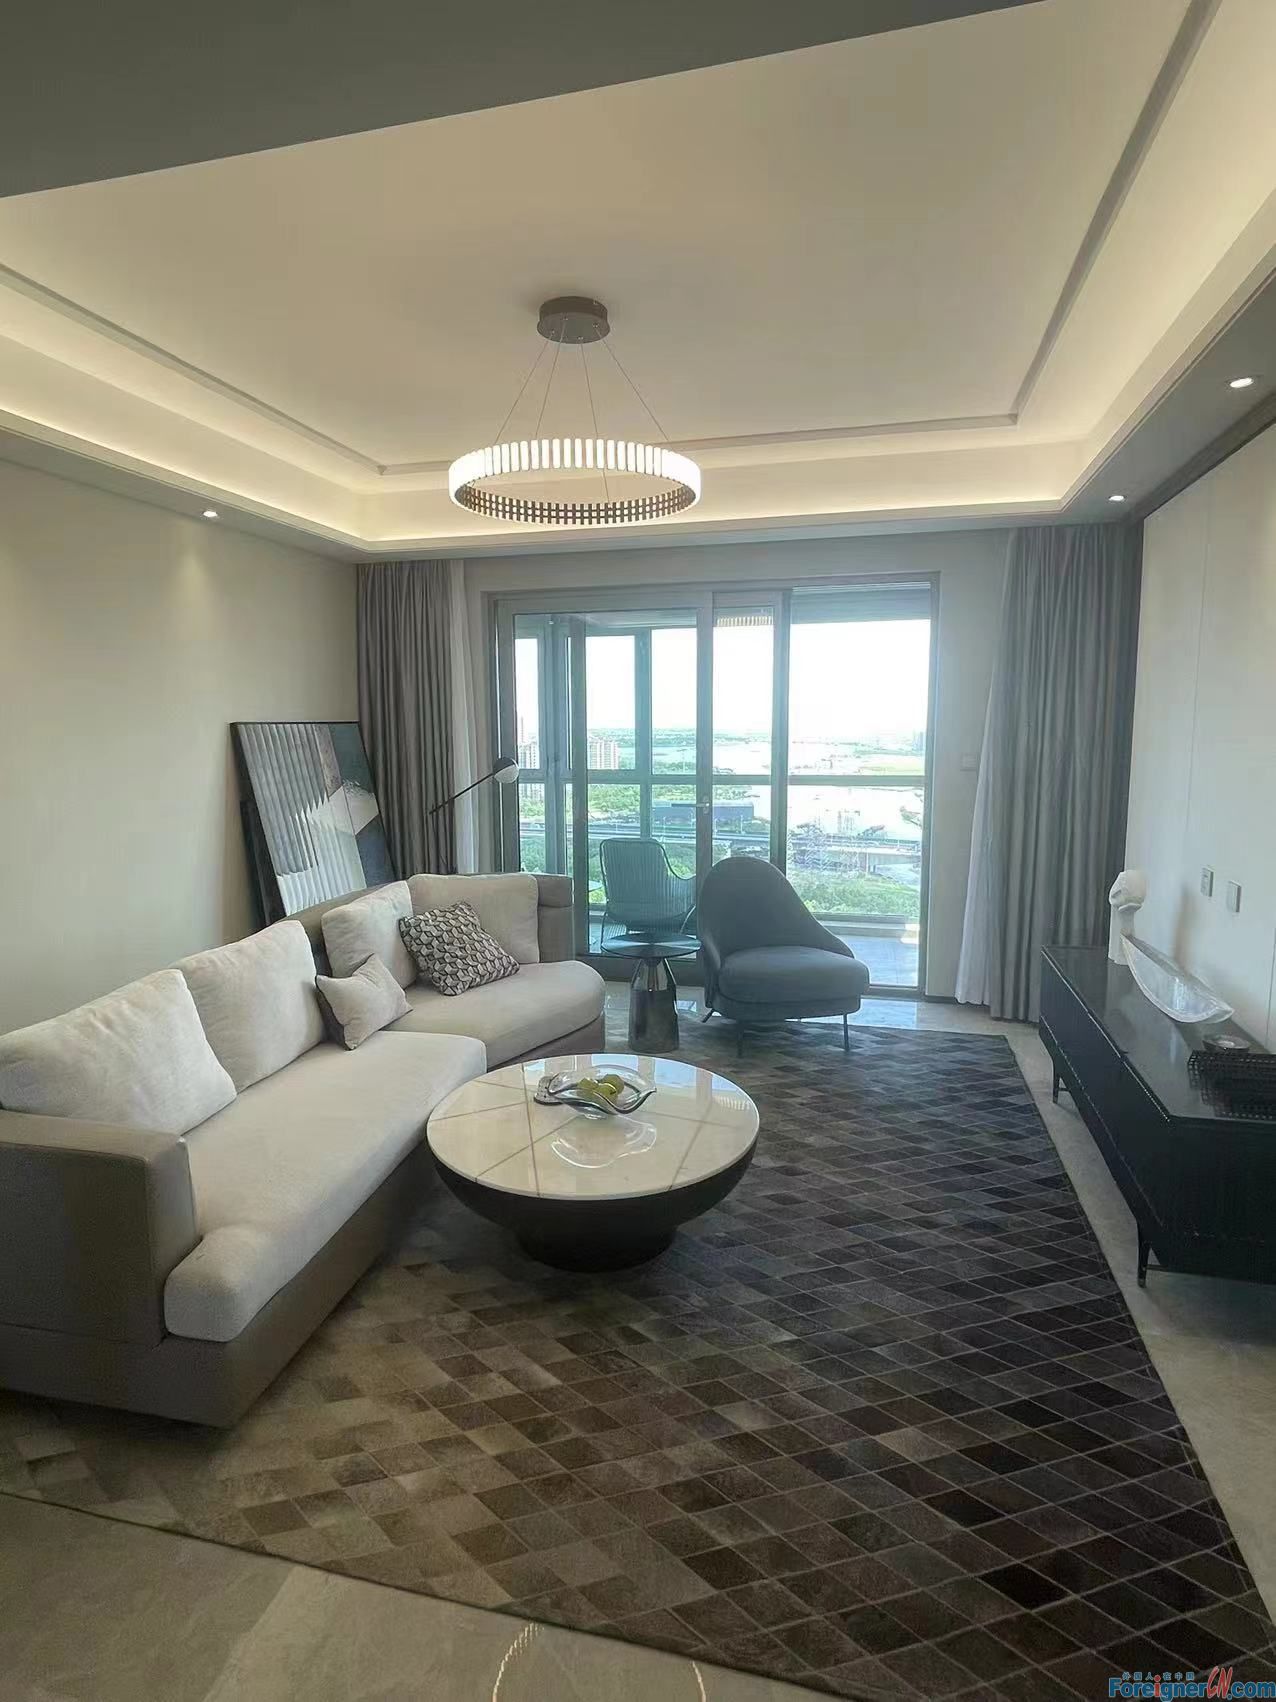 Excellent！！！Brand new house rent in Suzhou /4bedrooms 2 baths rent/ Suzhou/Central AC ,Bathtub,floor heating,Fully Furnished/close to XJTLU/Dushu Lake, Suzhou University and subway line 2